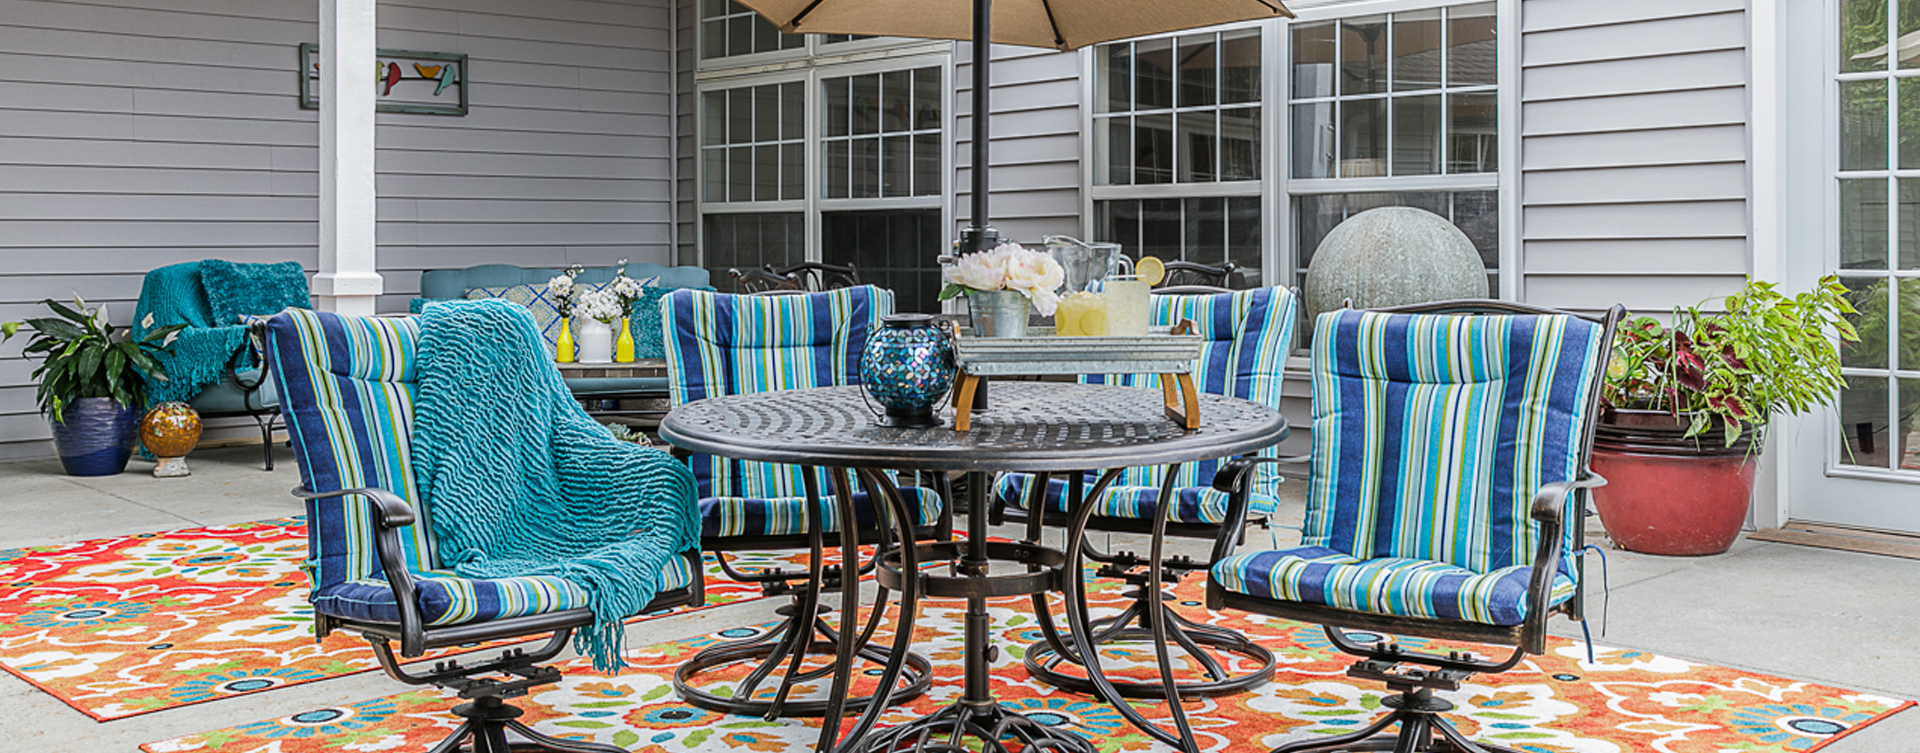 Feel like you’re on your own back porch in our courtyard at Bickford of Omaha - Blondo